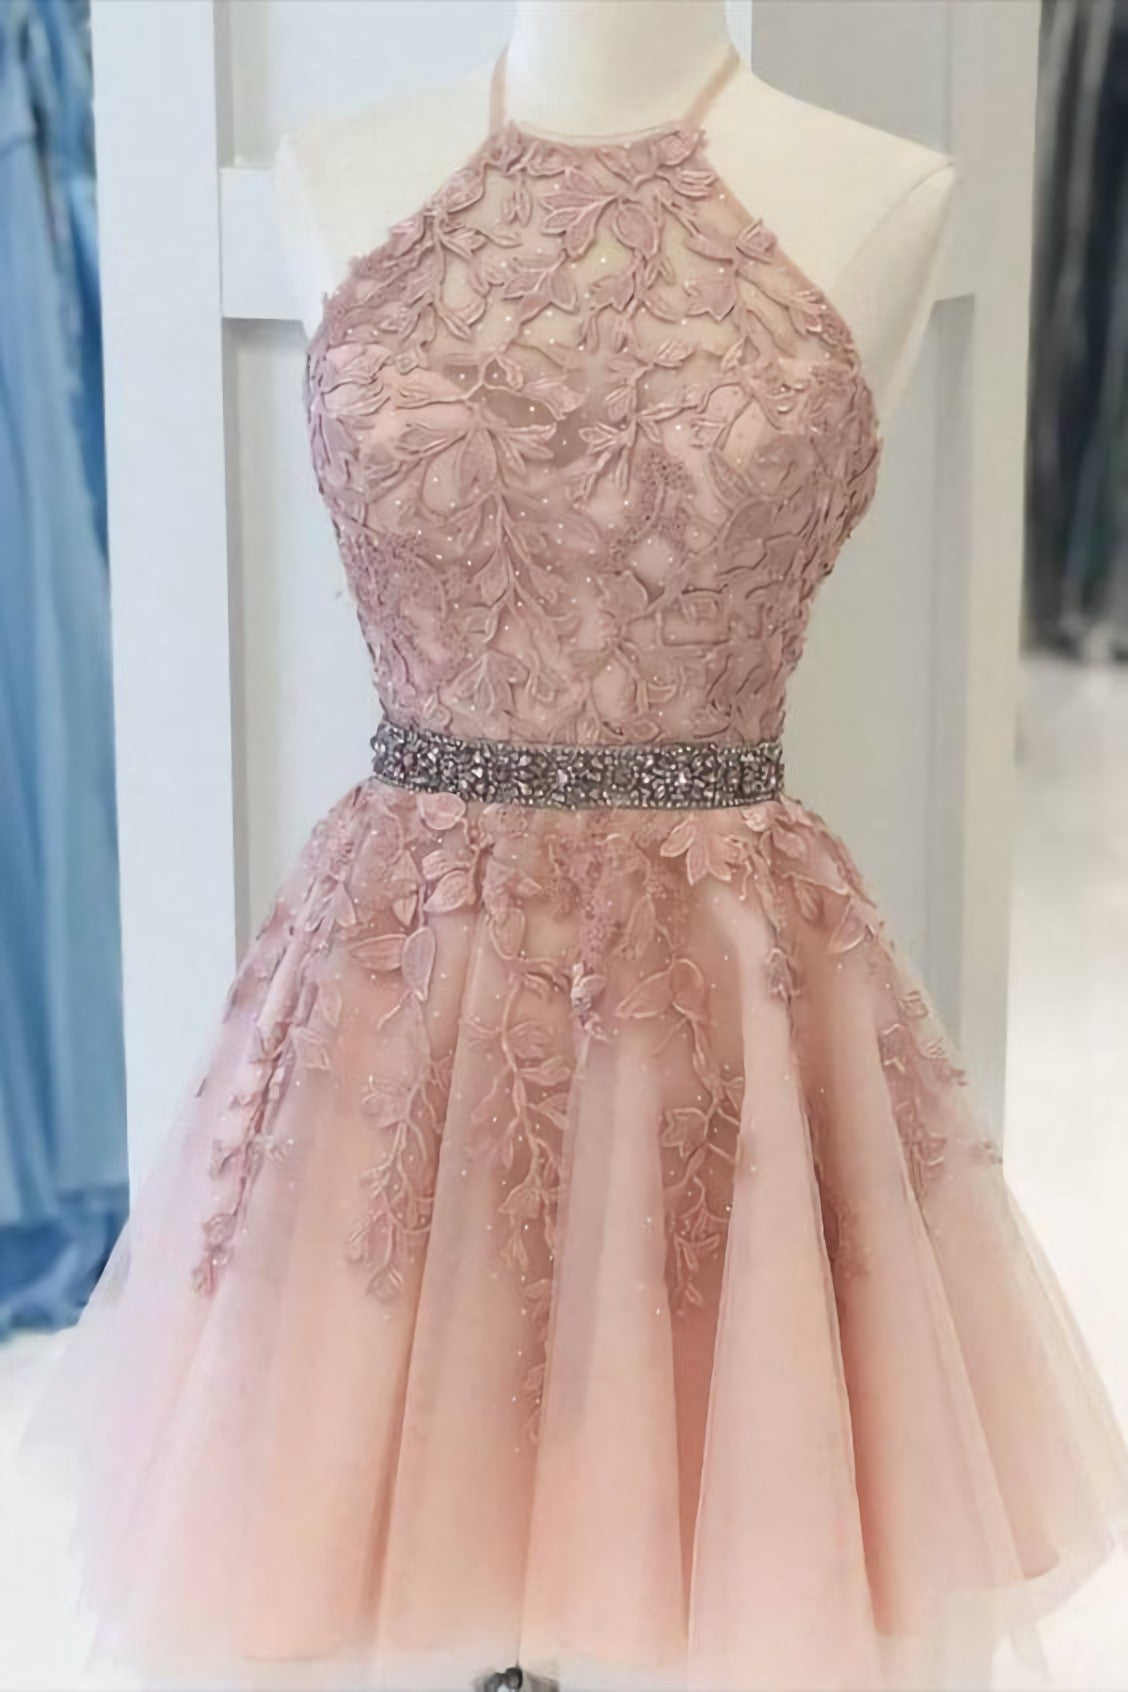 Pink Halter Appliqued Homecoming Dress, With Beading Belt